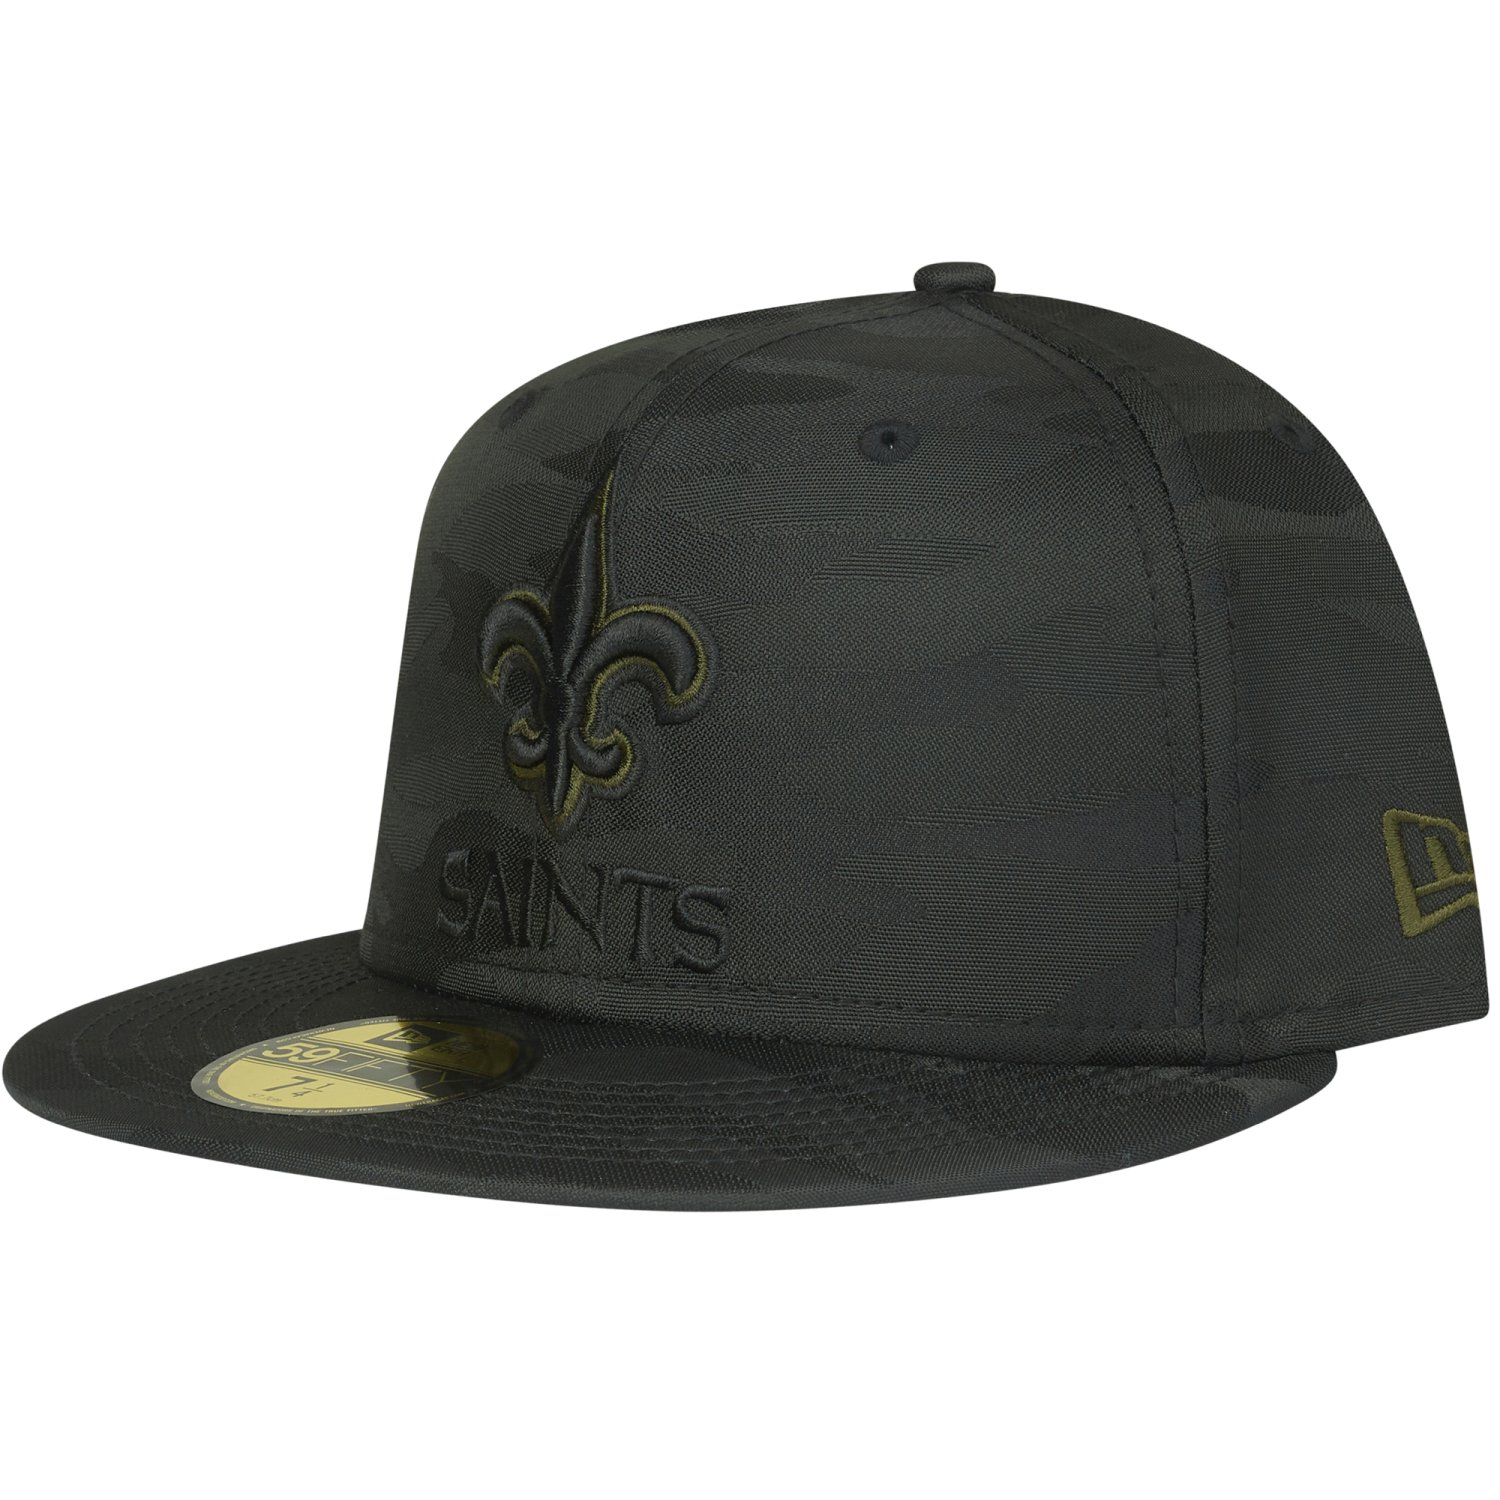 New Era 59Fifty Fitted Cap - NFL New Orleans Saints | Fitted | Caps ...